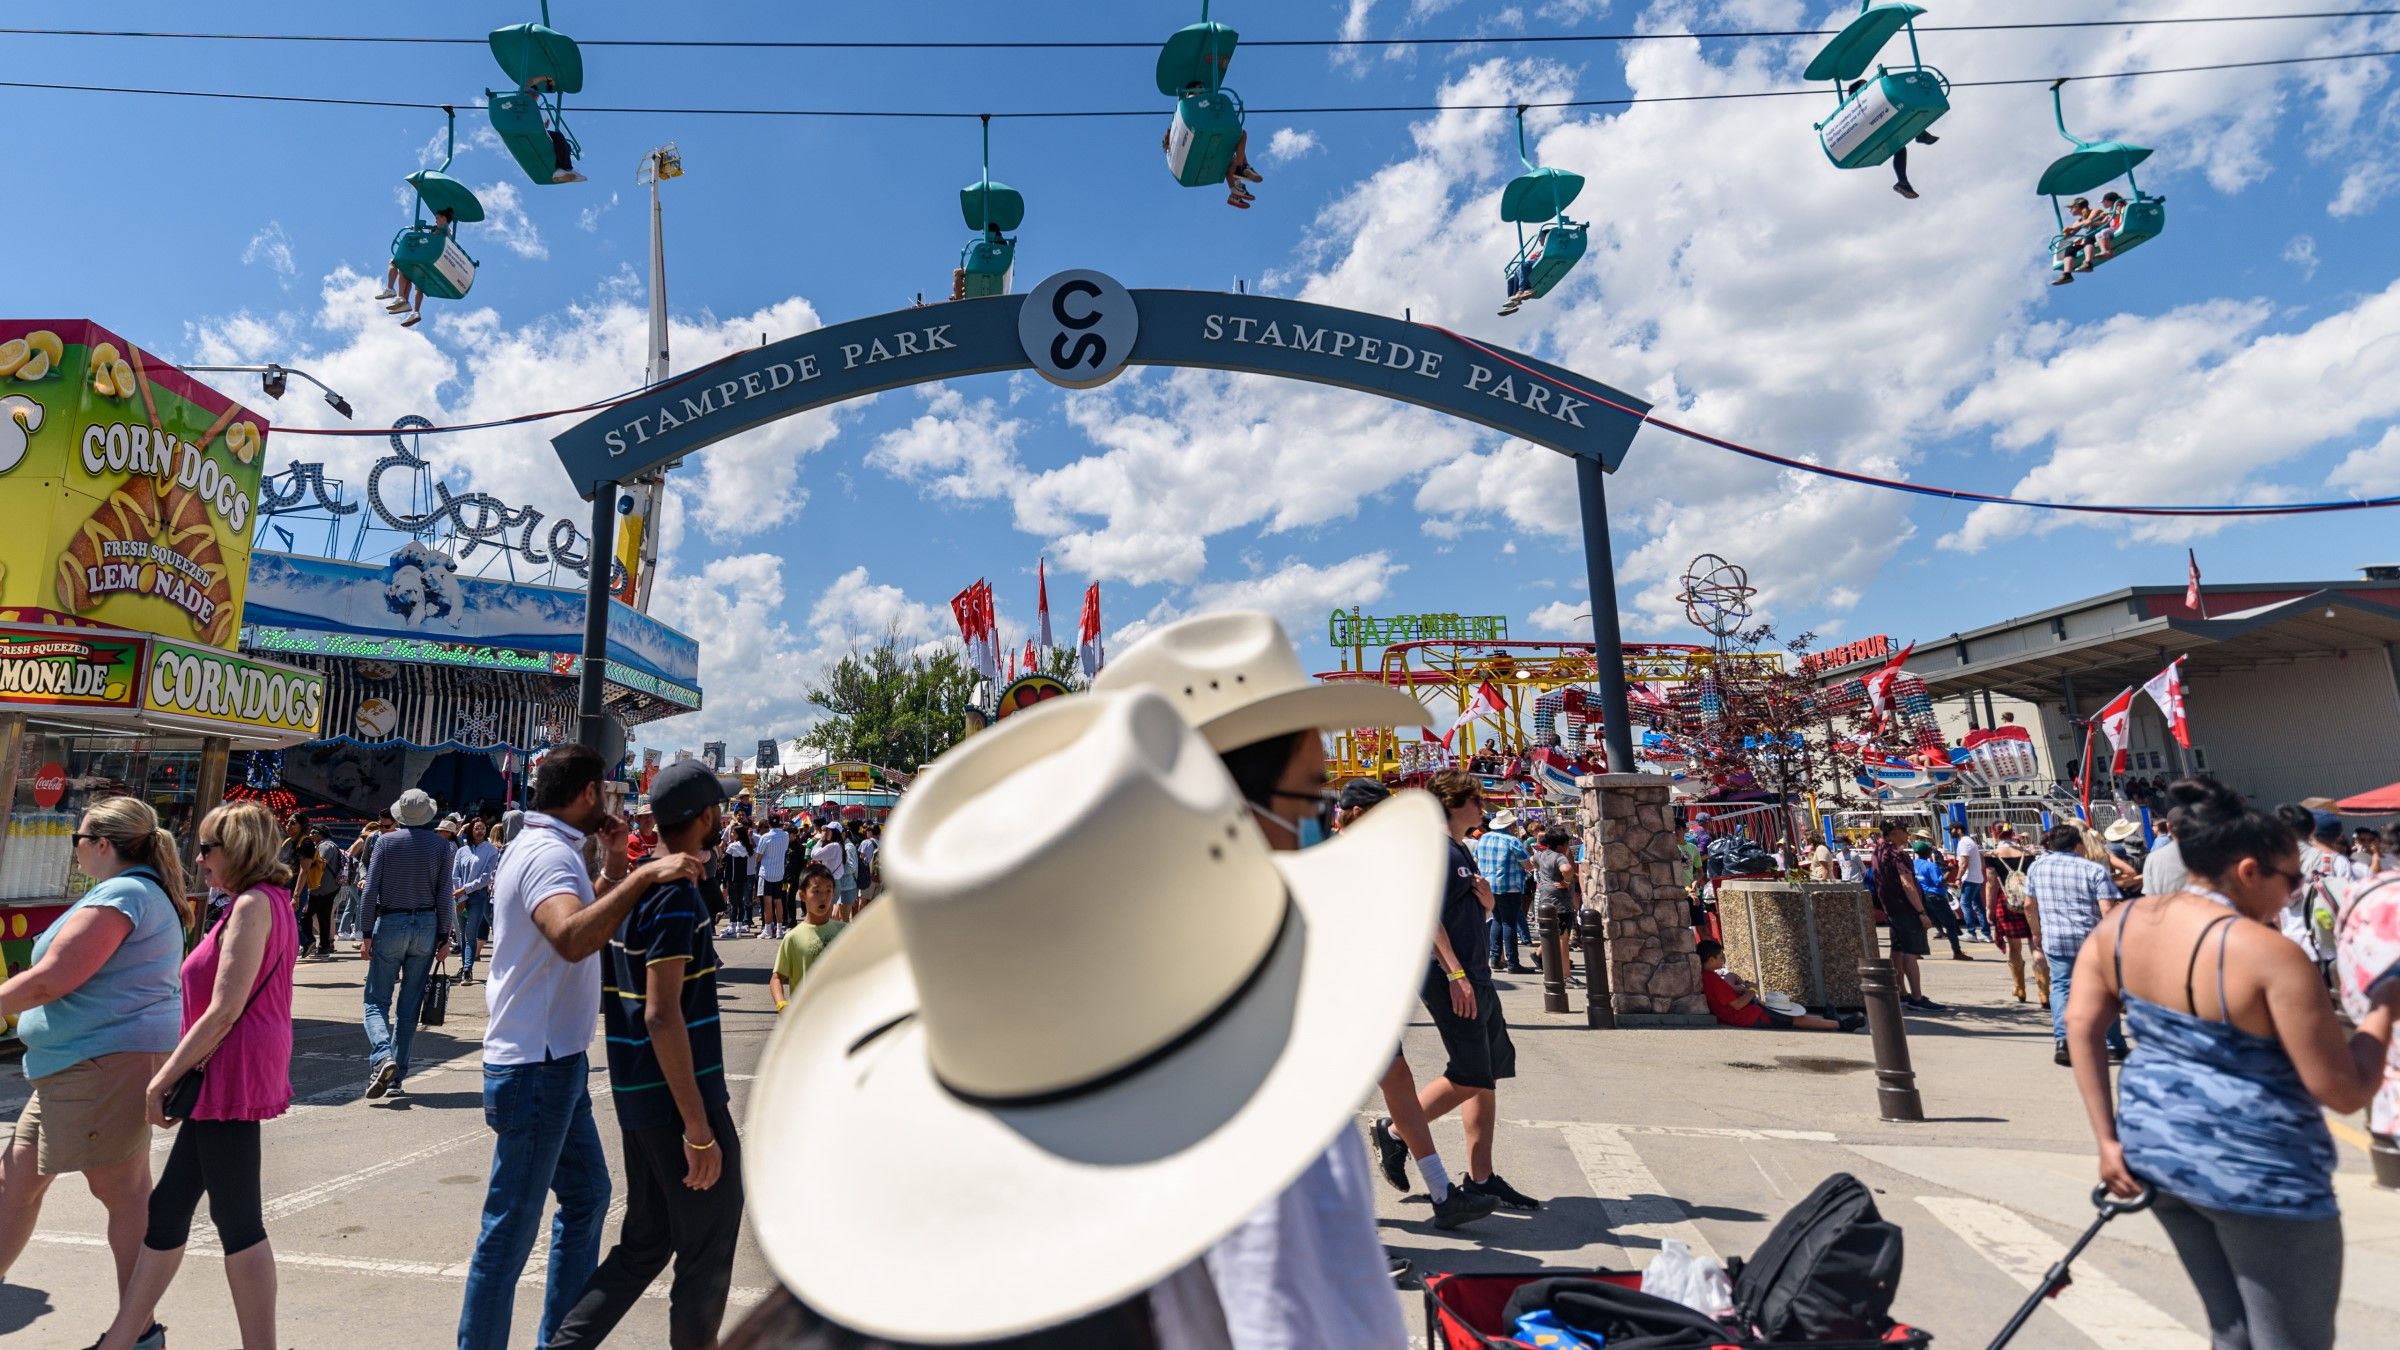 The Calgary Stampede adds spirit and an economic boost to the city ...